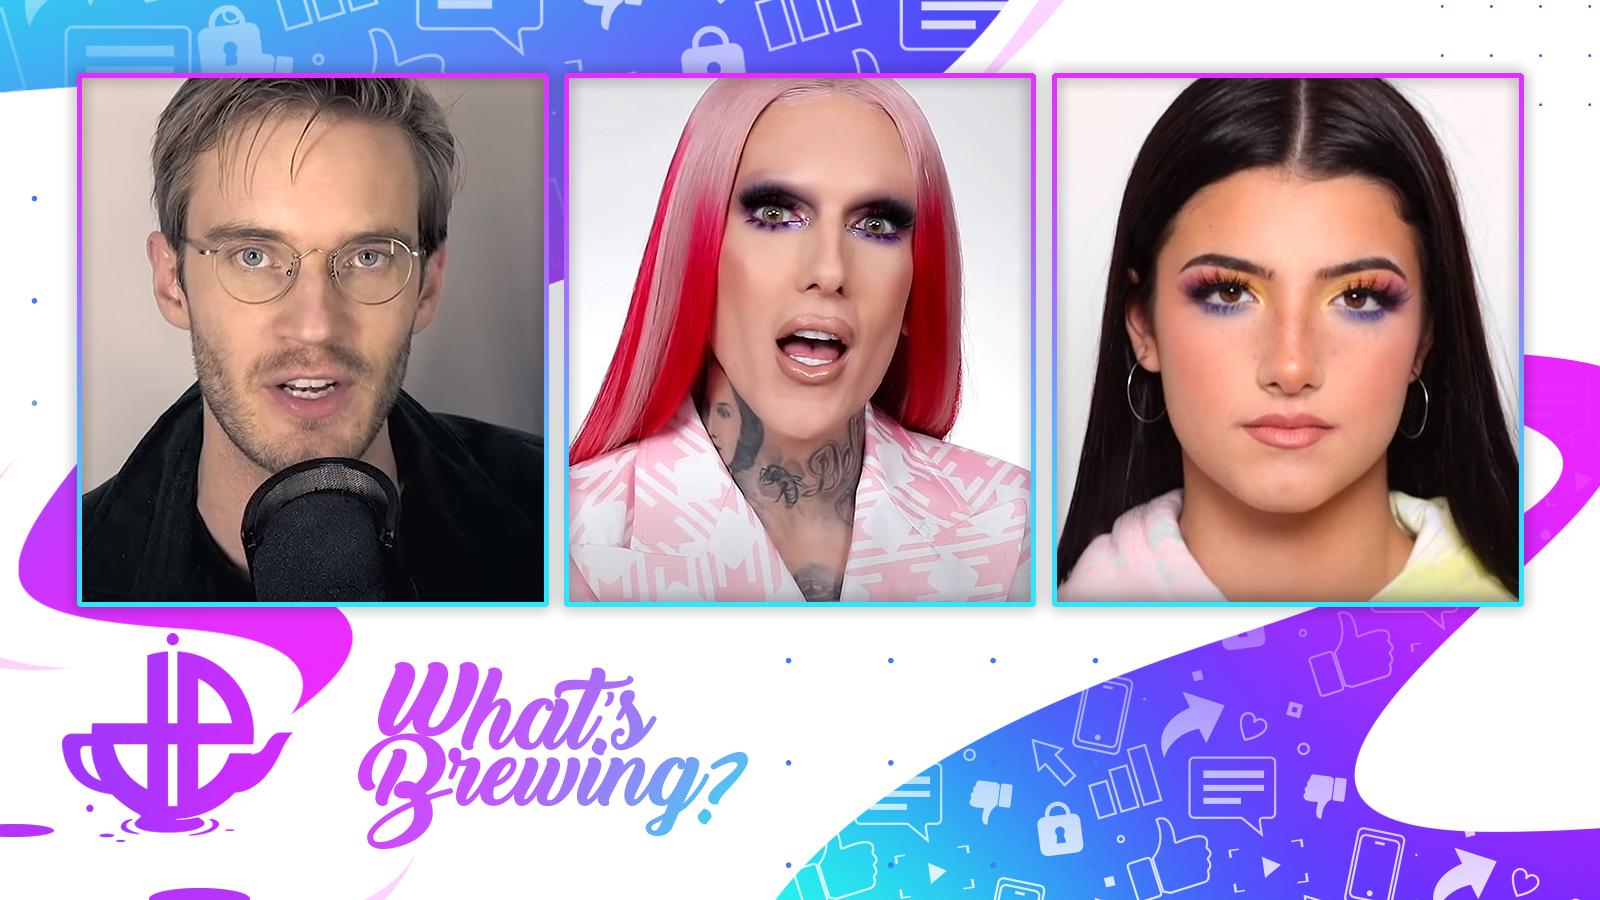 PewDiePie, Jeffree Star, and Charli D'Amelio are shown on the What's Brewing logo.